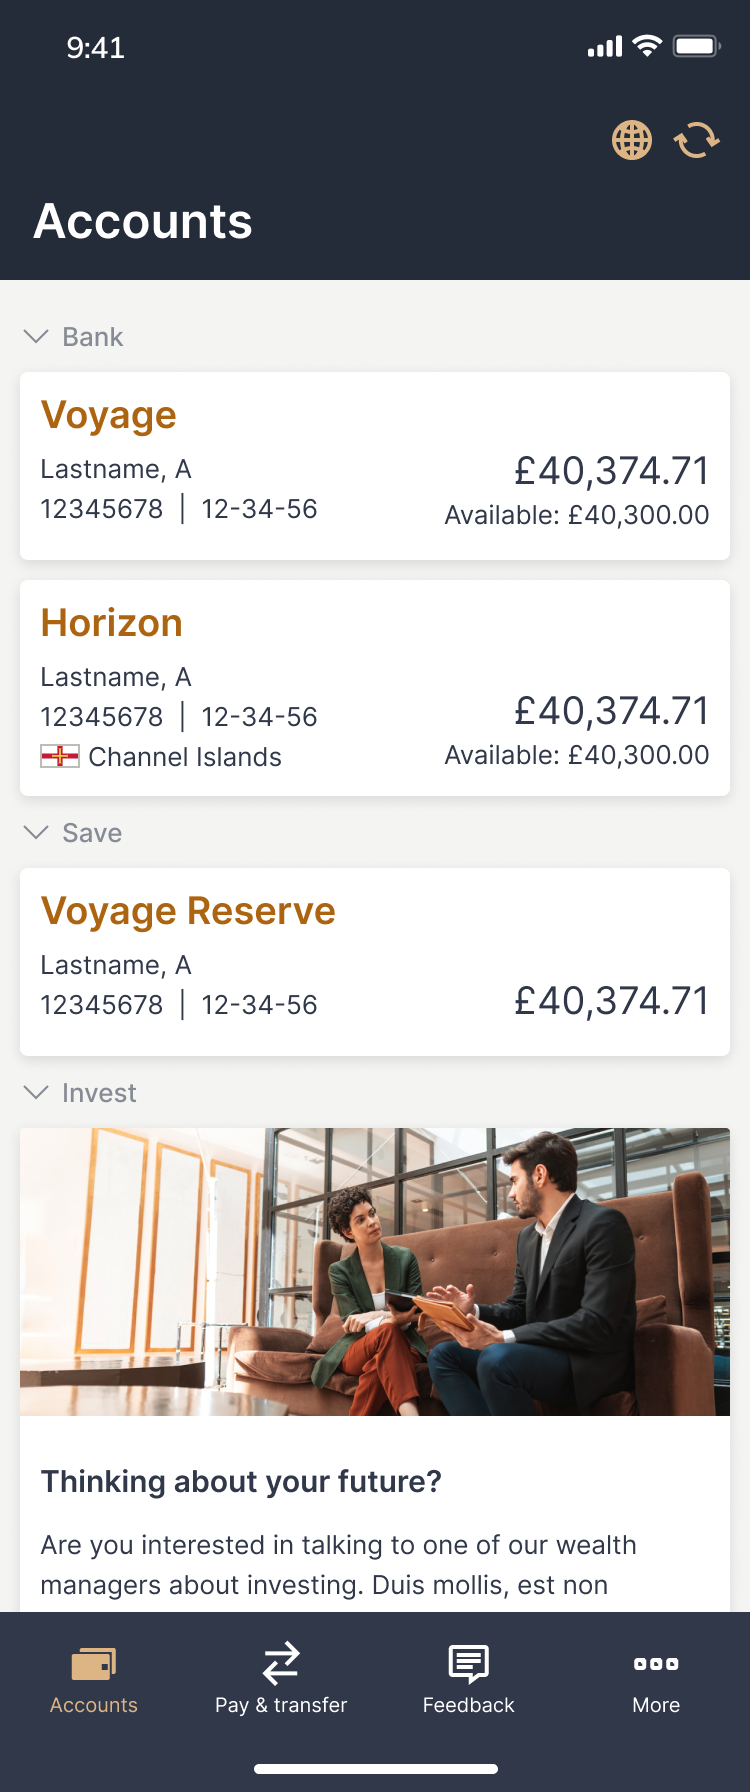 The Investec UK app in action